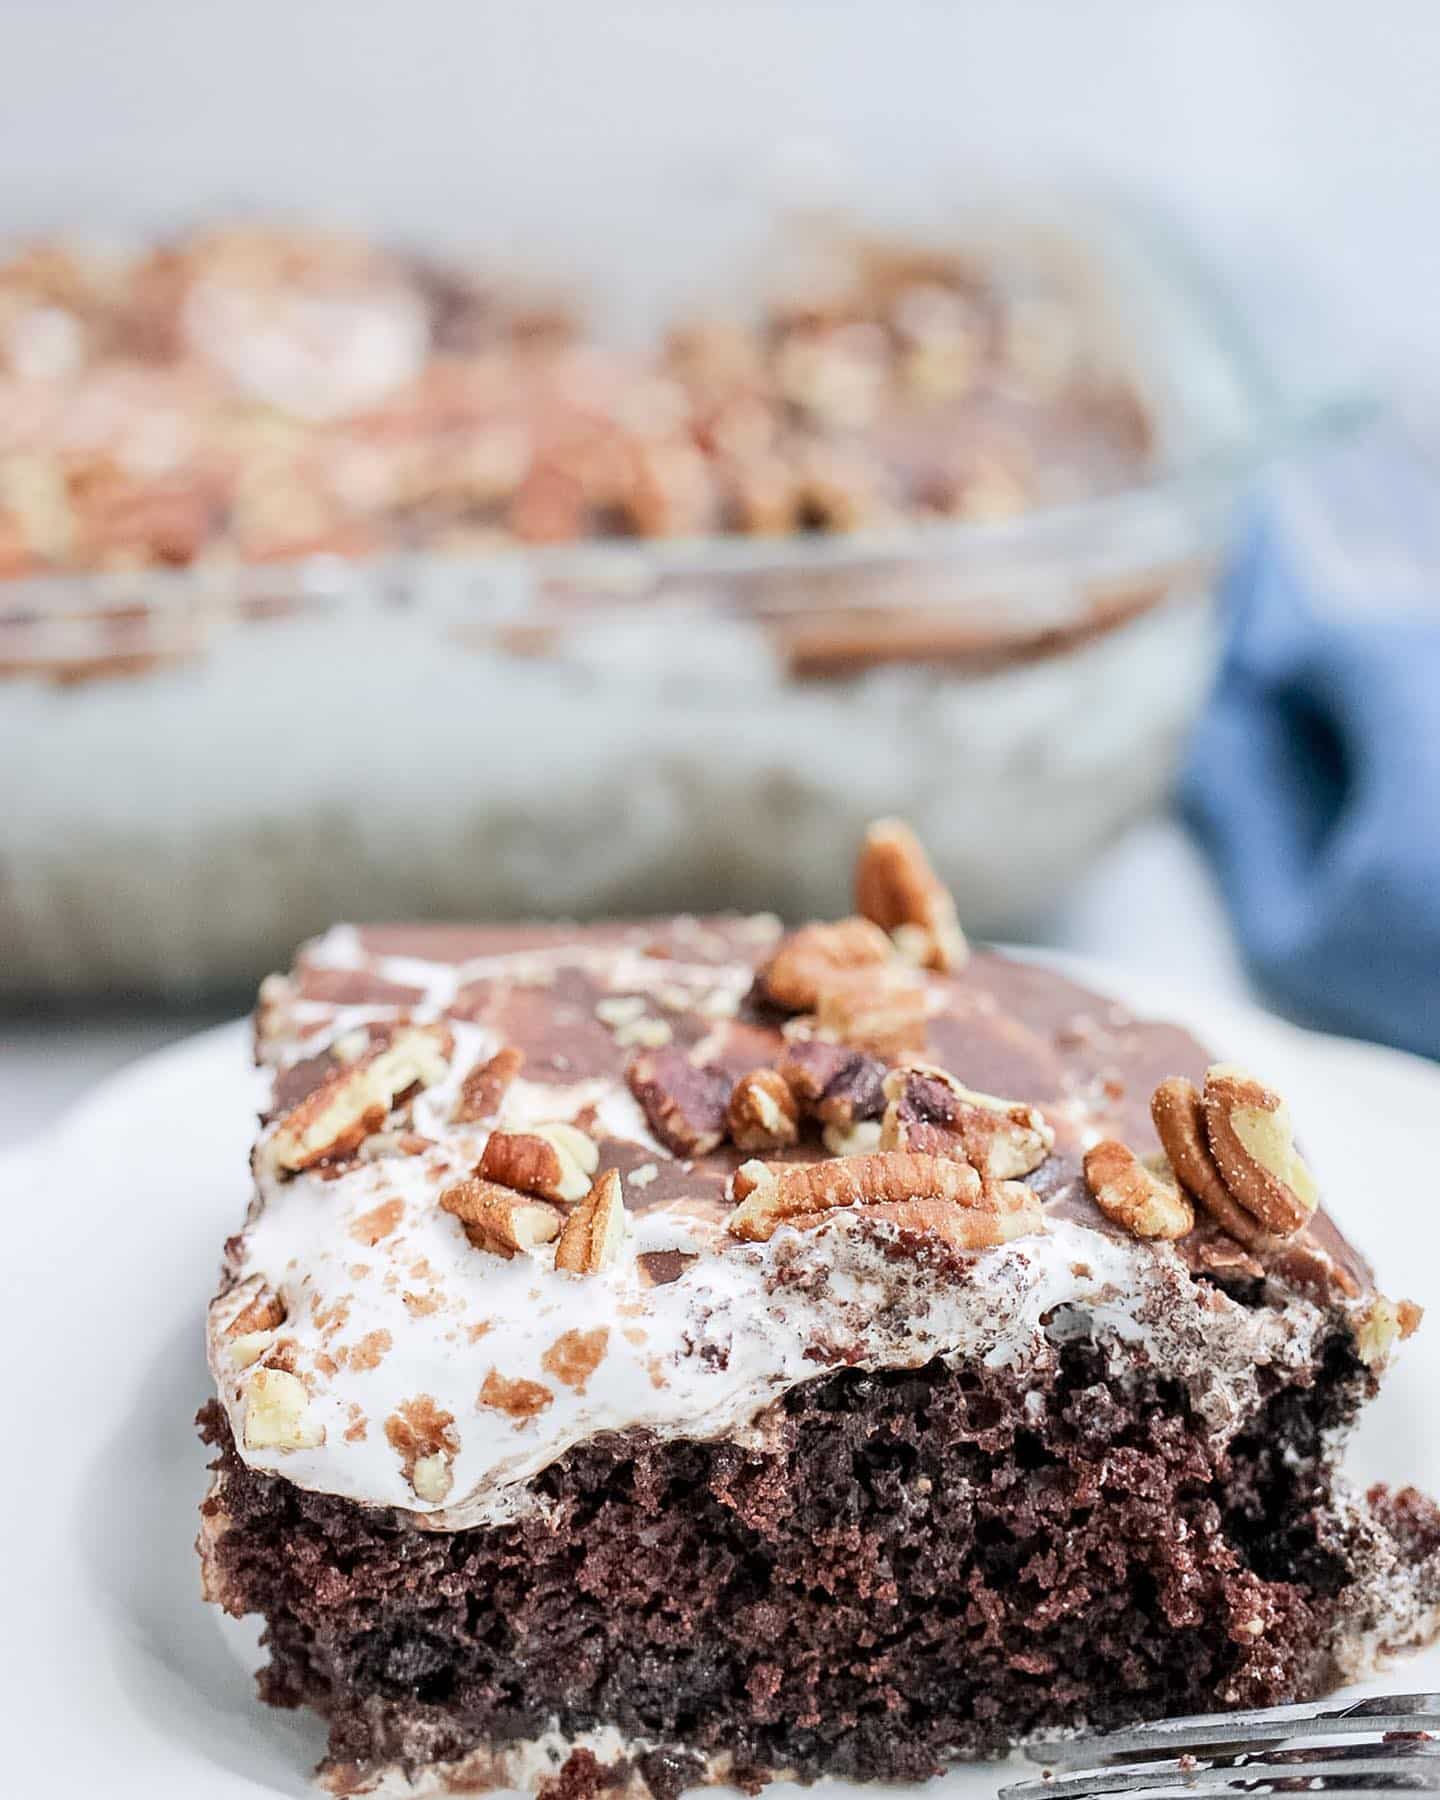 The perfect moist chocolate dessert is a #mississippimudcake. With chocolate cake, mashmallows and pecans it’s delicious and easy to make. The recipe is now up on Mashed. 

#sheetcakerecipes #southernrecipes #dessertrecipe #foodphotography #bakingphotography #mudcakerecipe